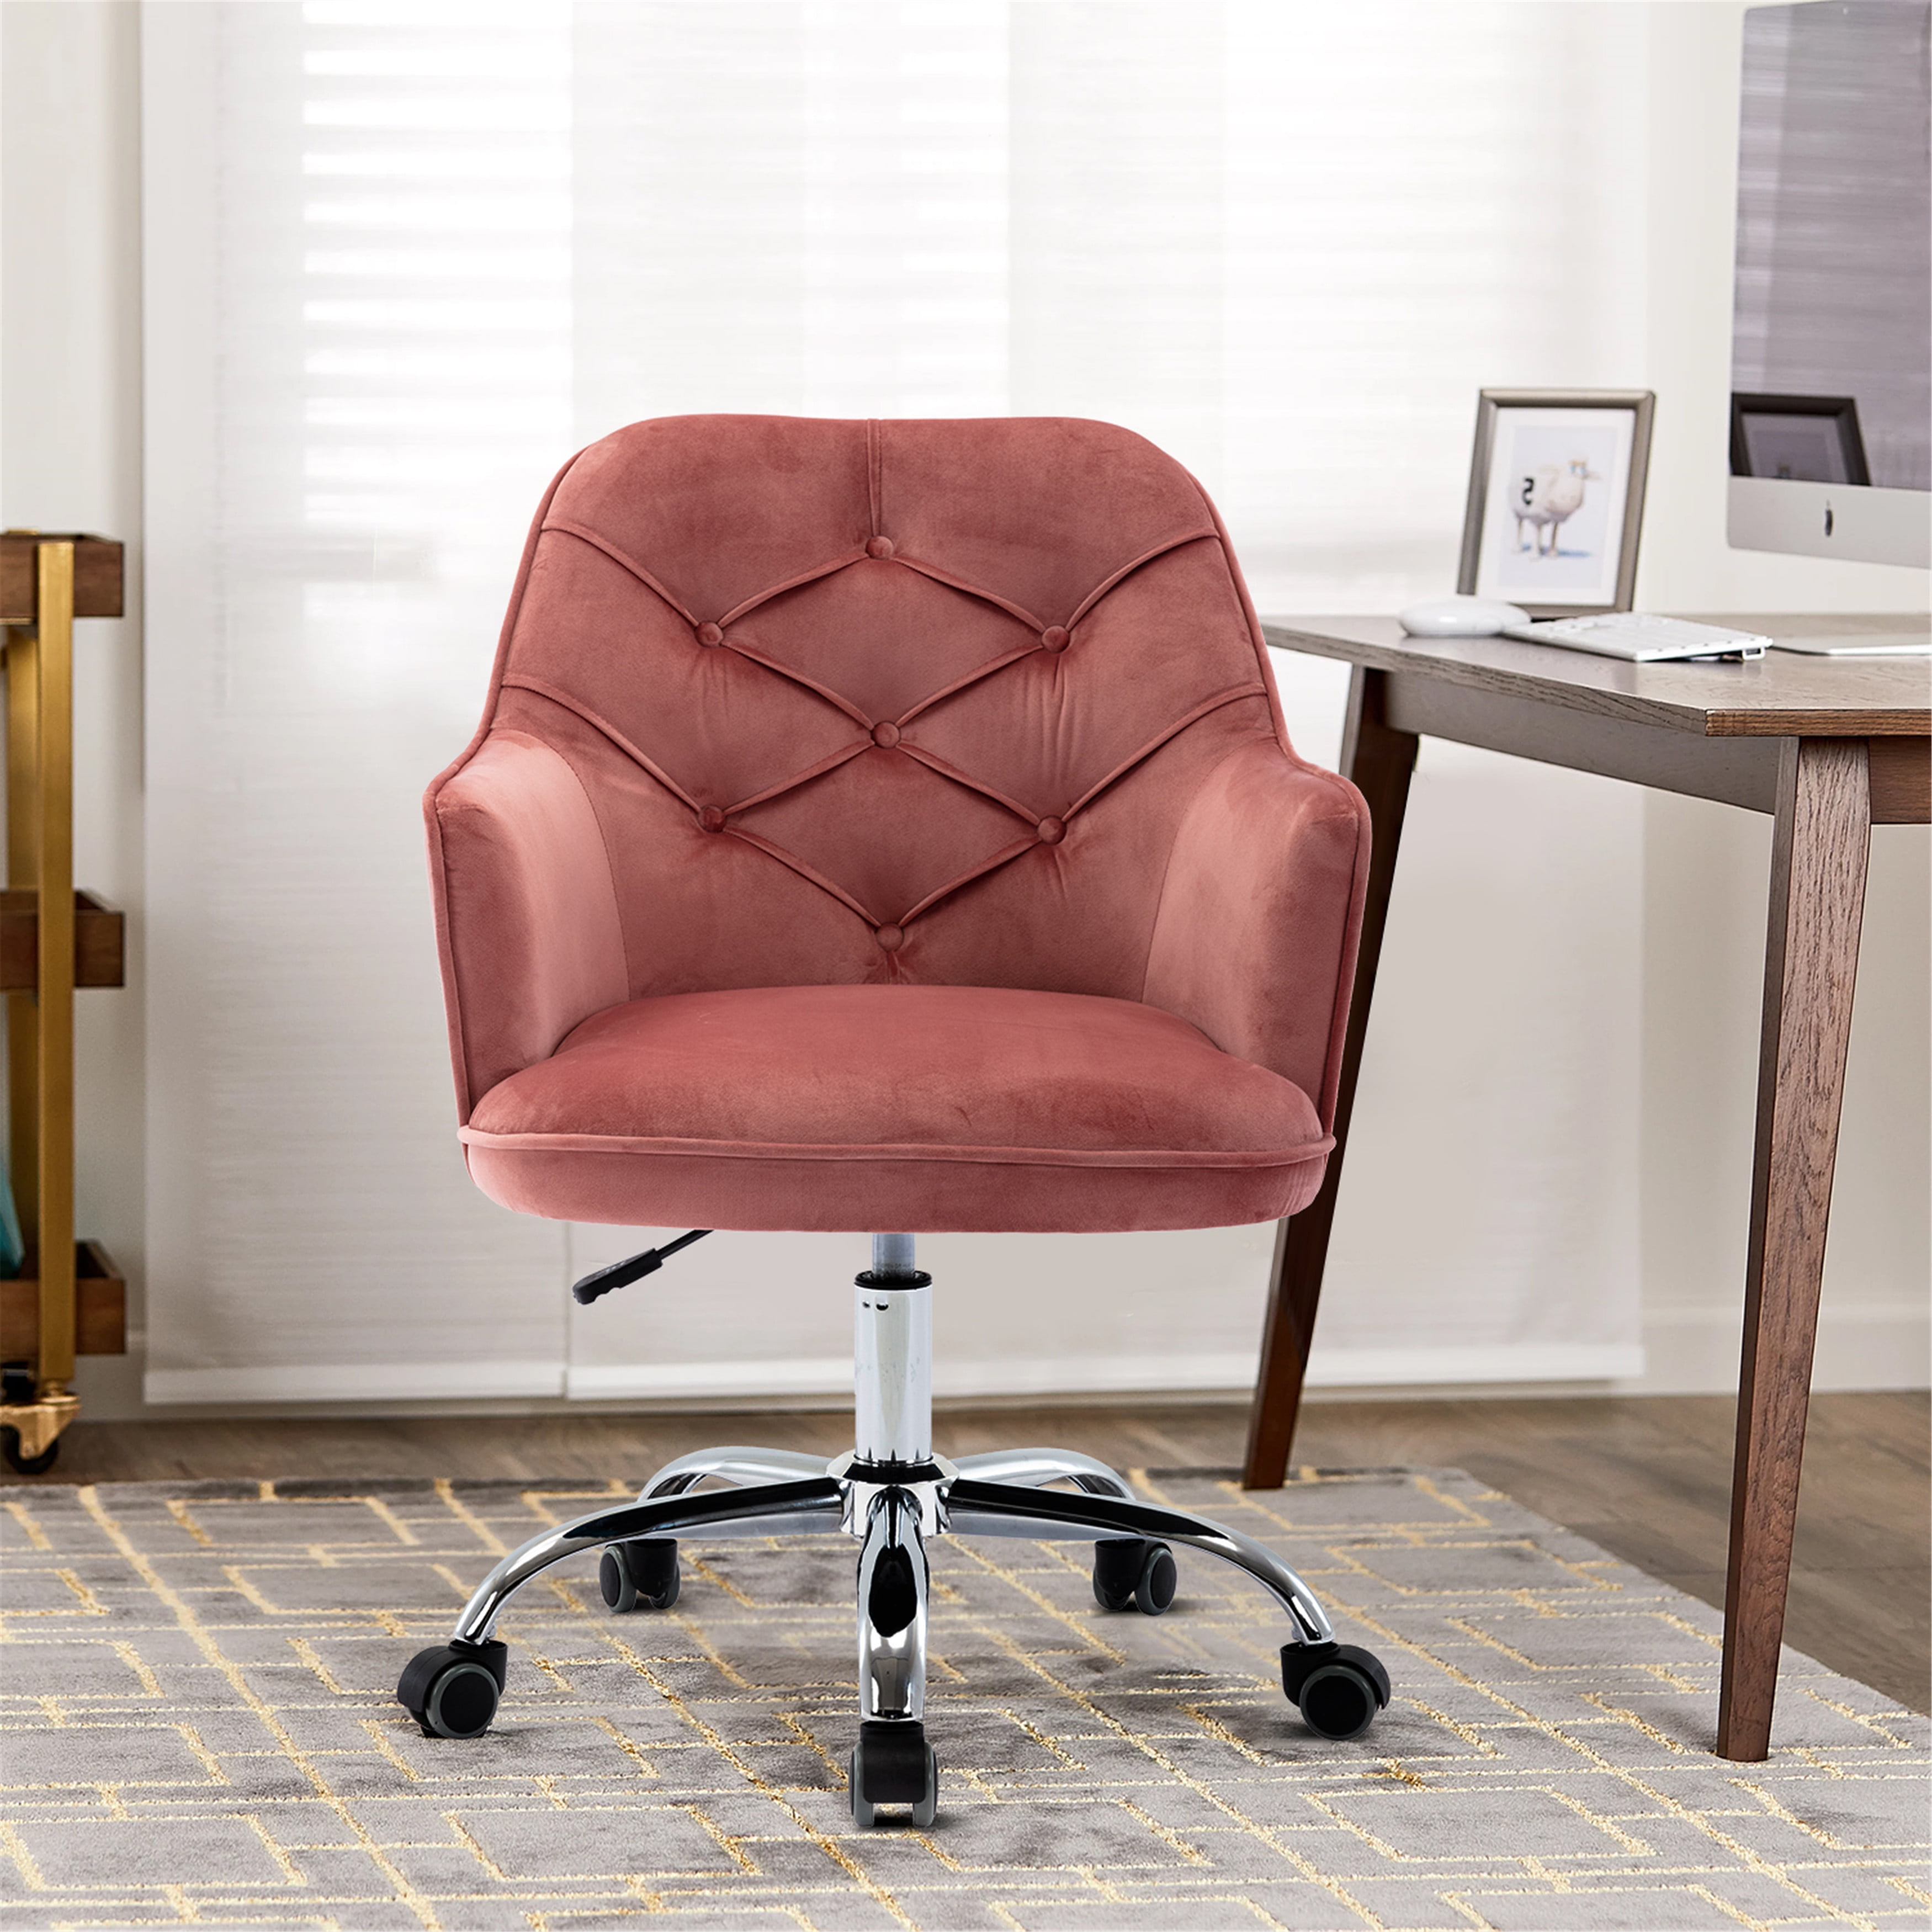 Details about   Office Mid-Back Desk Chair Height Adjustable Wooden Leather Swivel Task Chair 